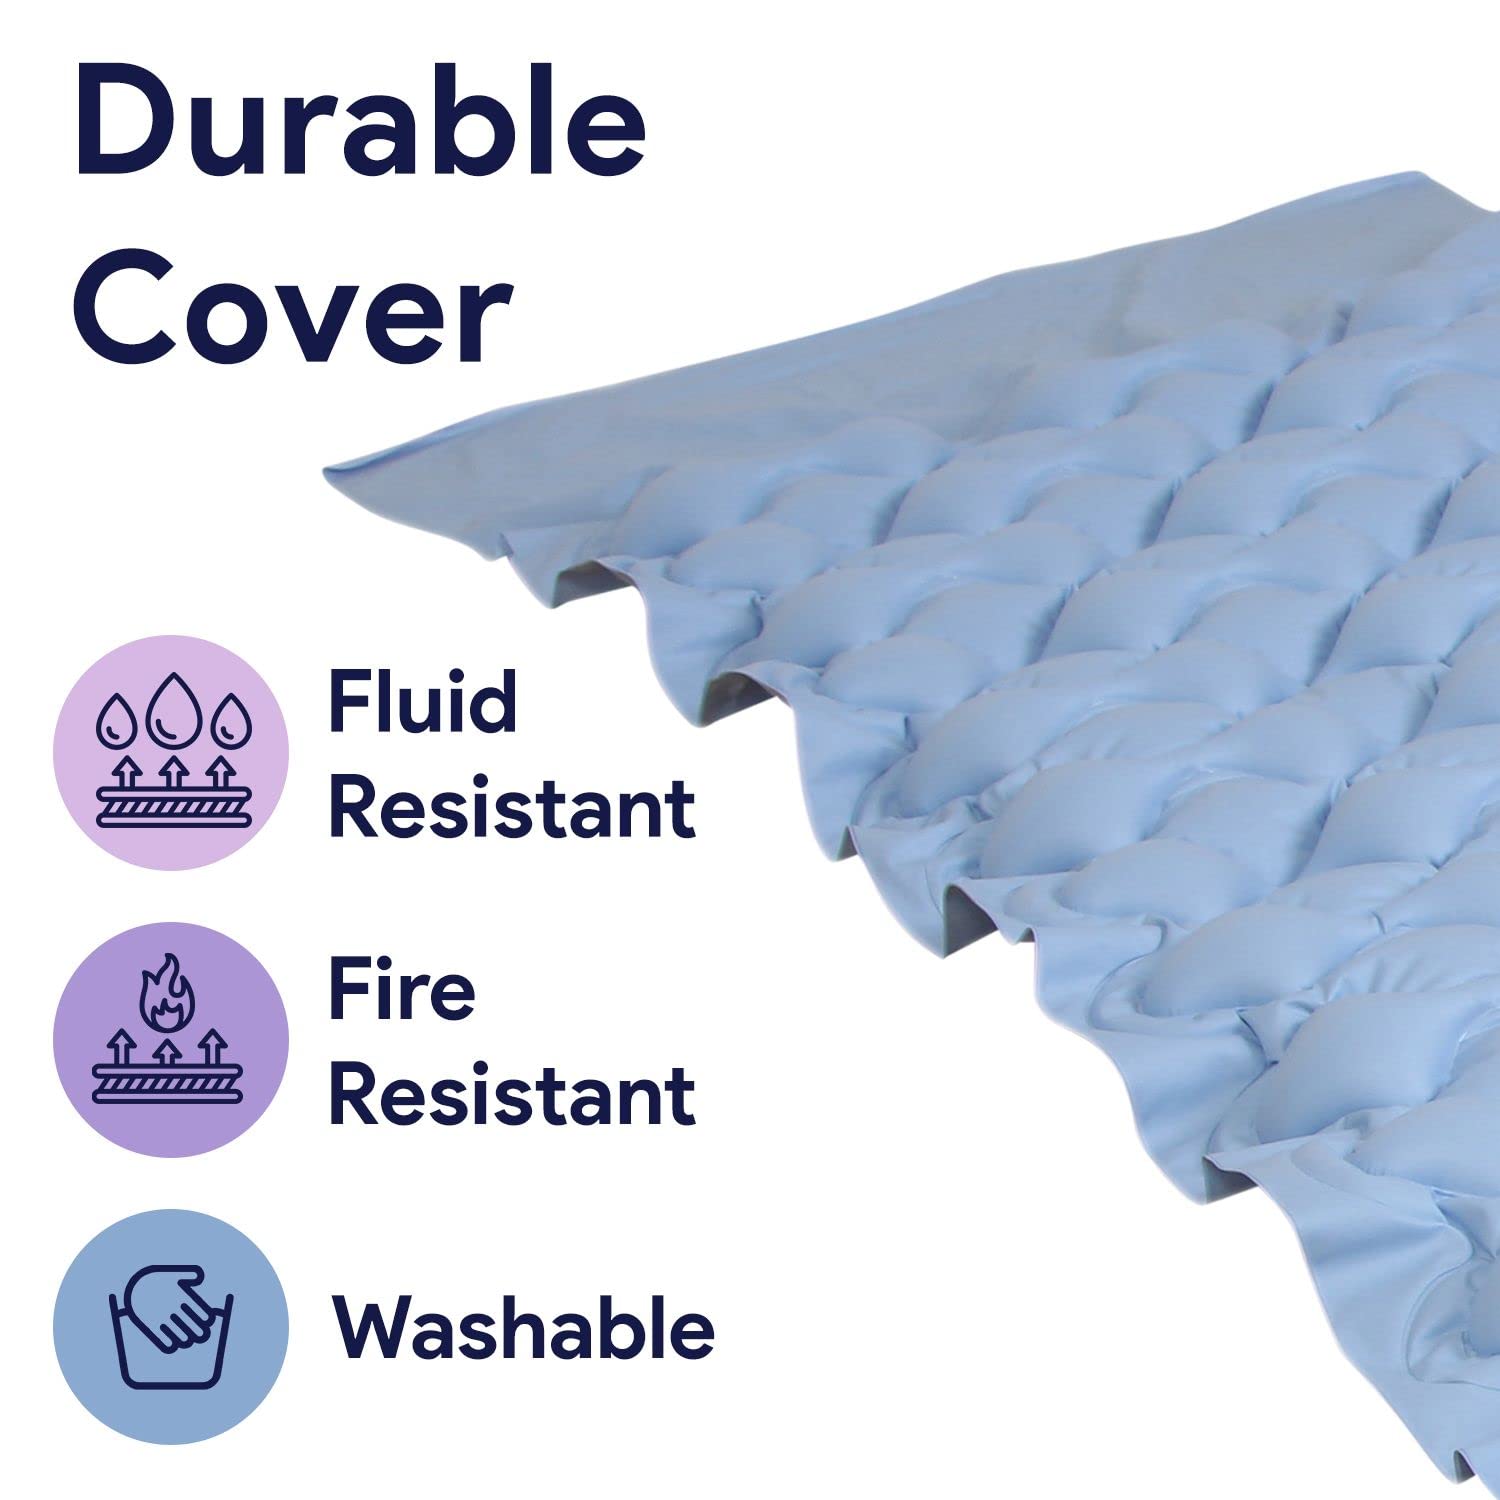 Alternating Pressure Pad - Bed Pad to Prevent Bed Sores with Silent Electric Air Pump - Lightweight, Fire Retardant Air Mattress Overlay  - Like New